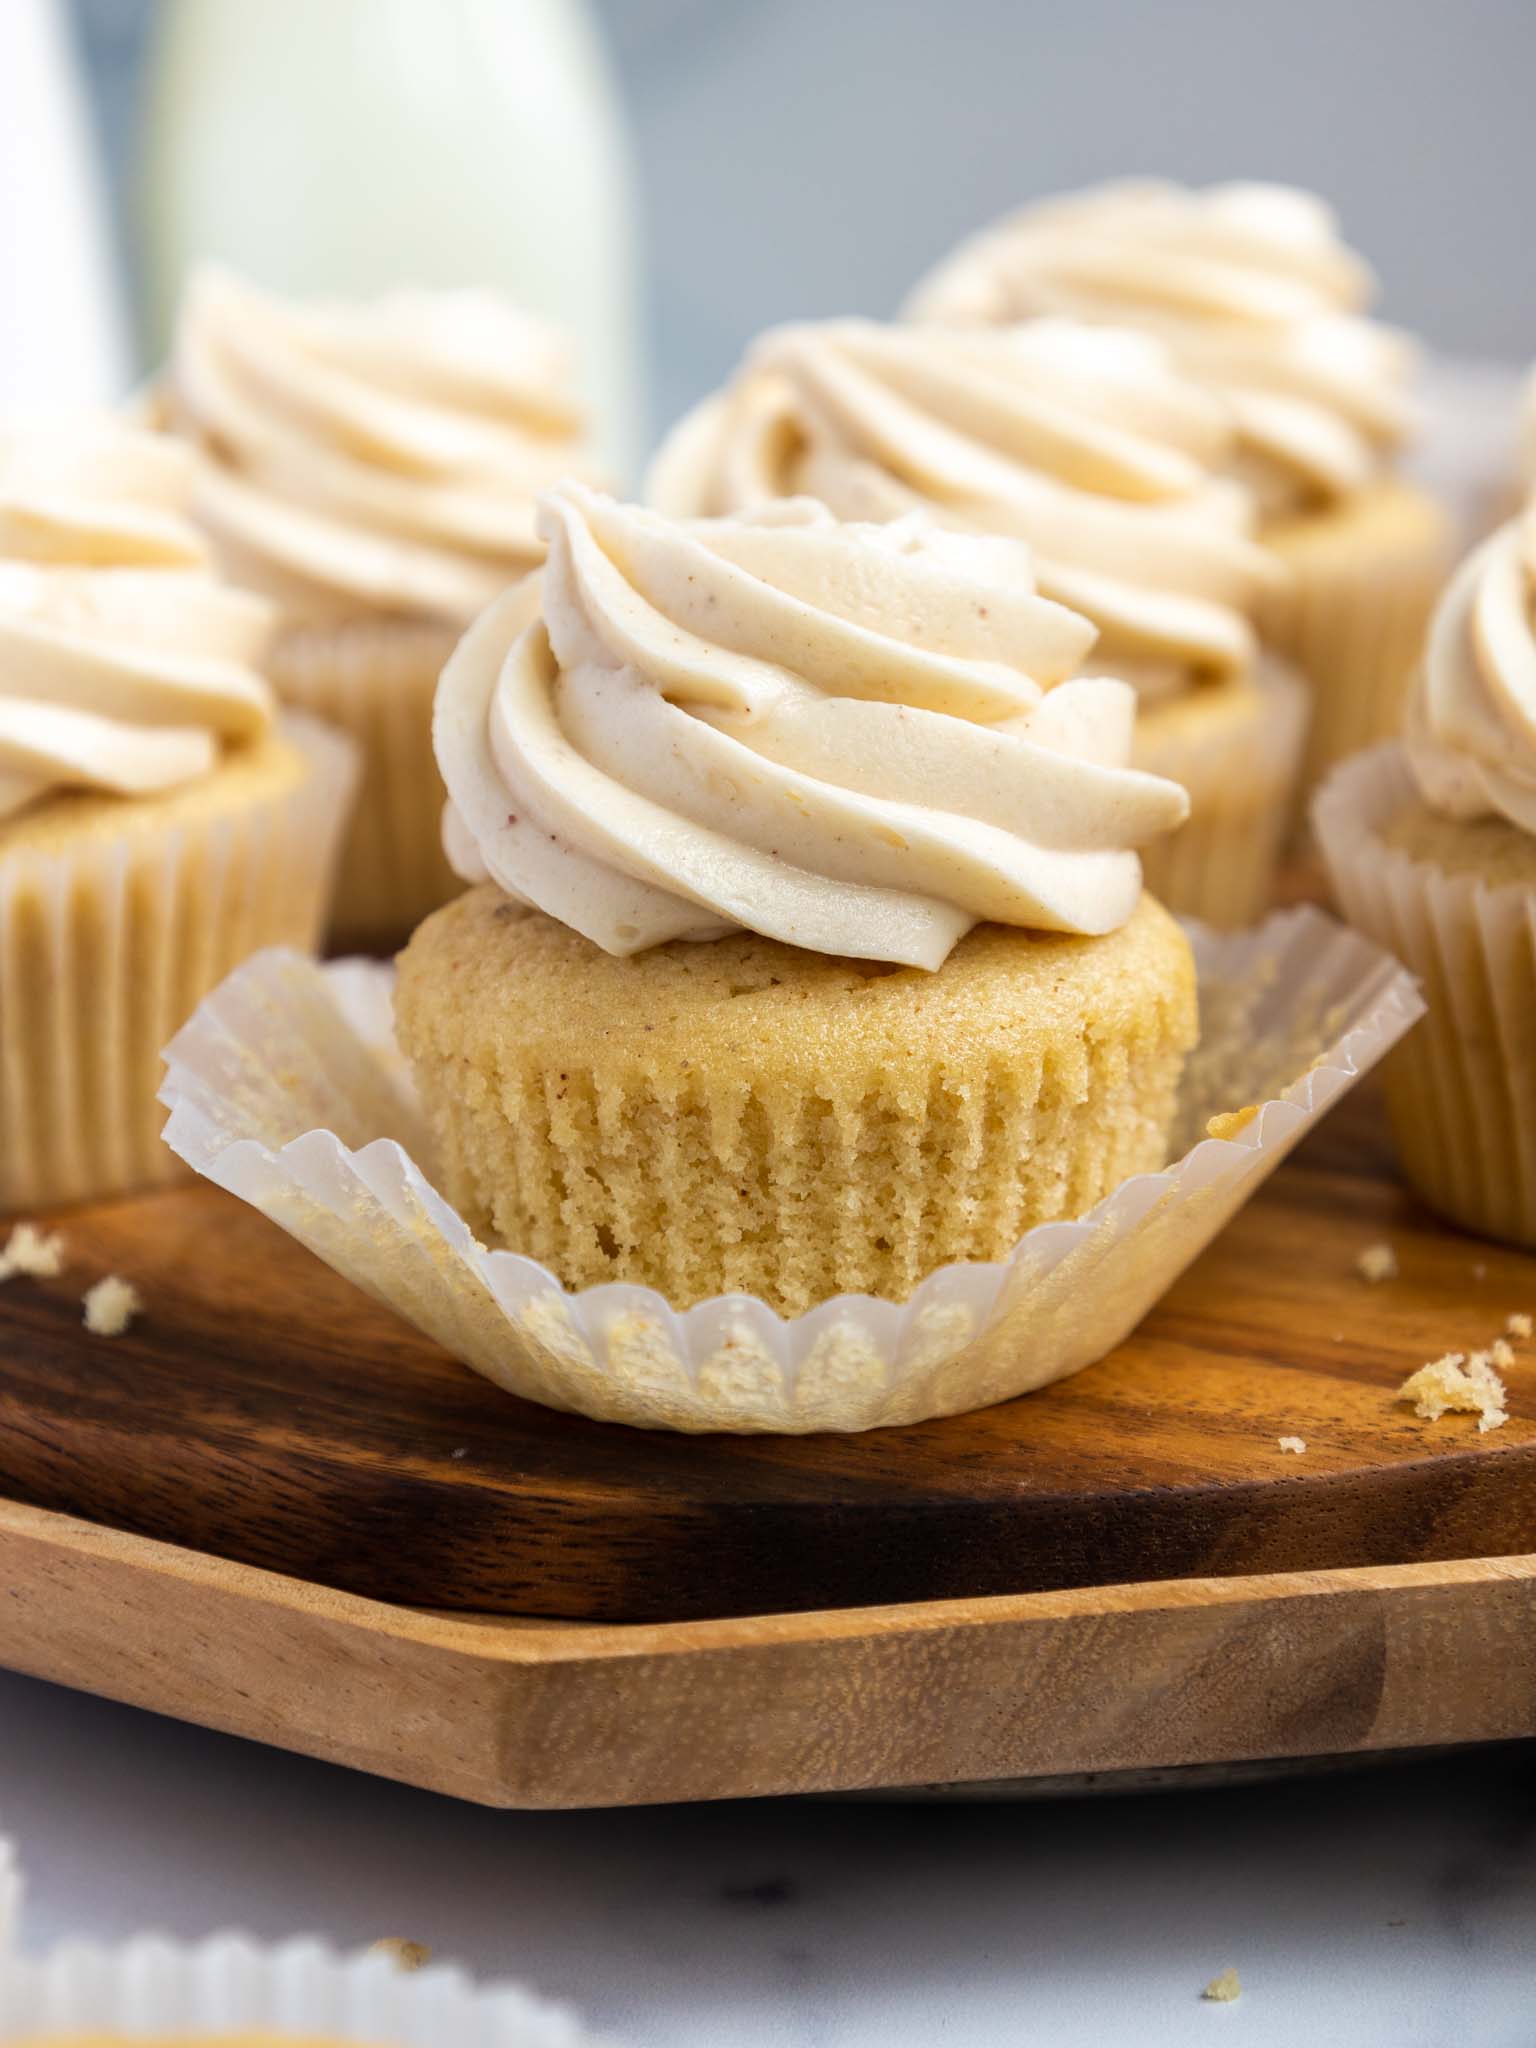 image of a brown butter cupcake that's been unwrapped